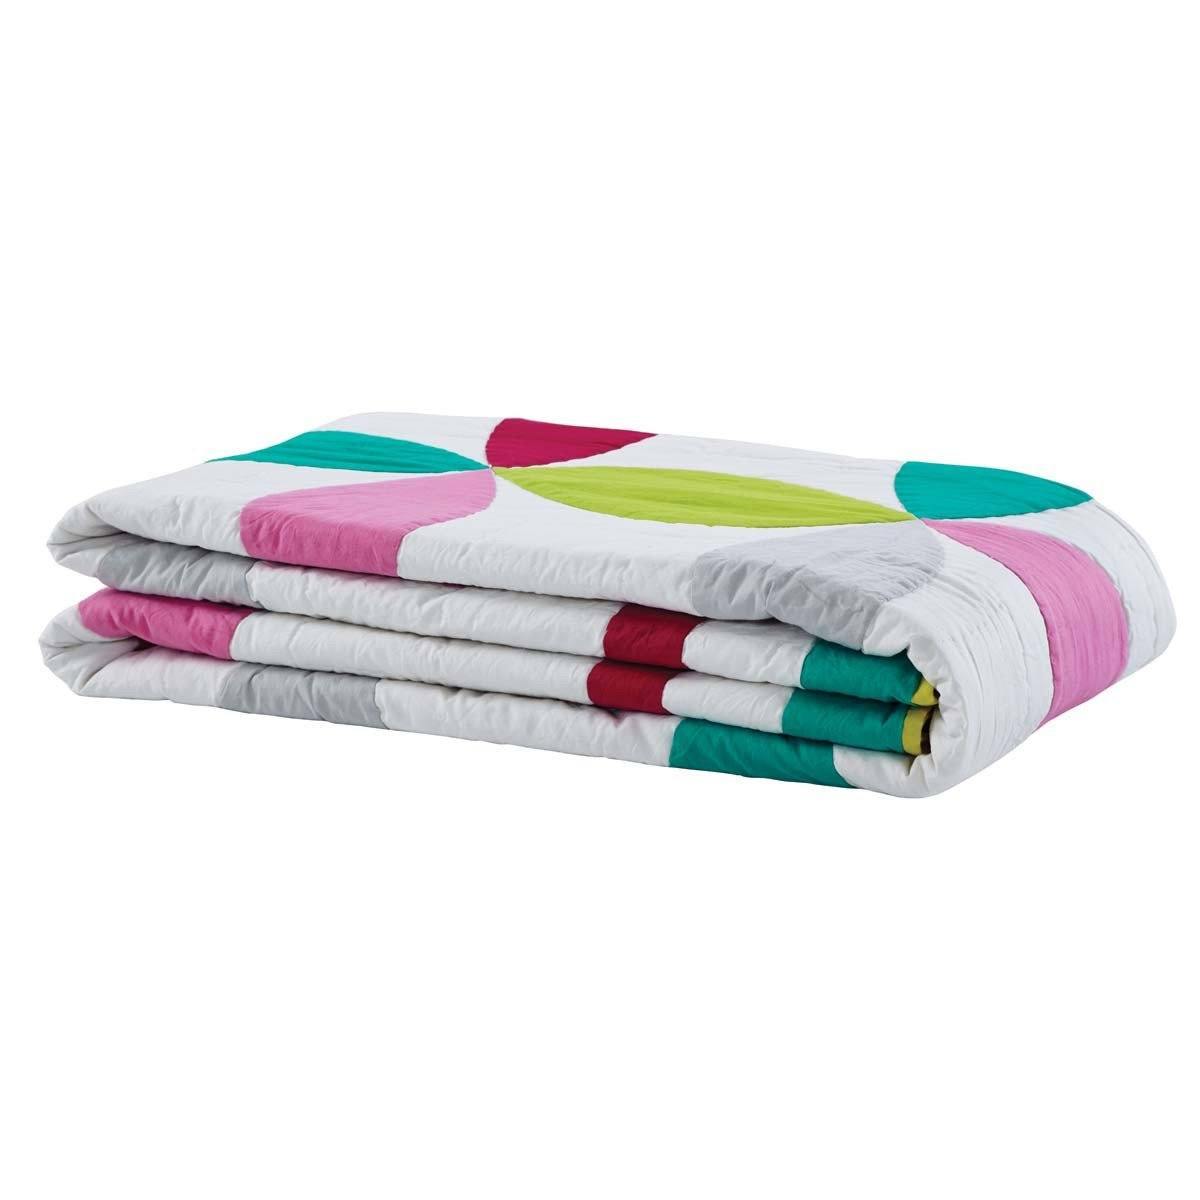 Everly Twin Set; Quilt 68Wx86L-1 Sham 21x27 VHC Brands folded